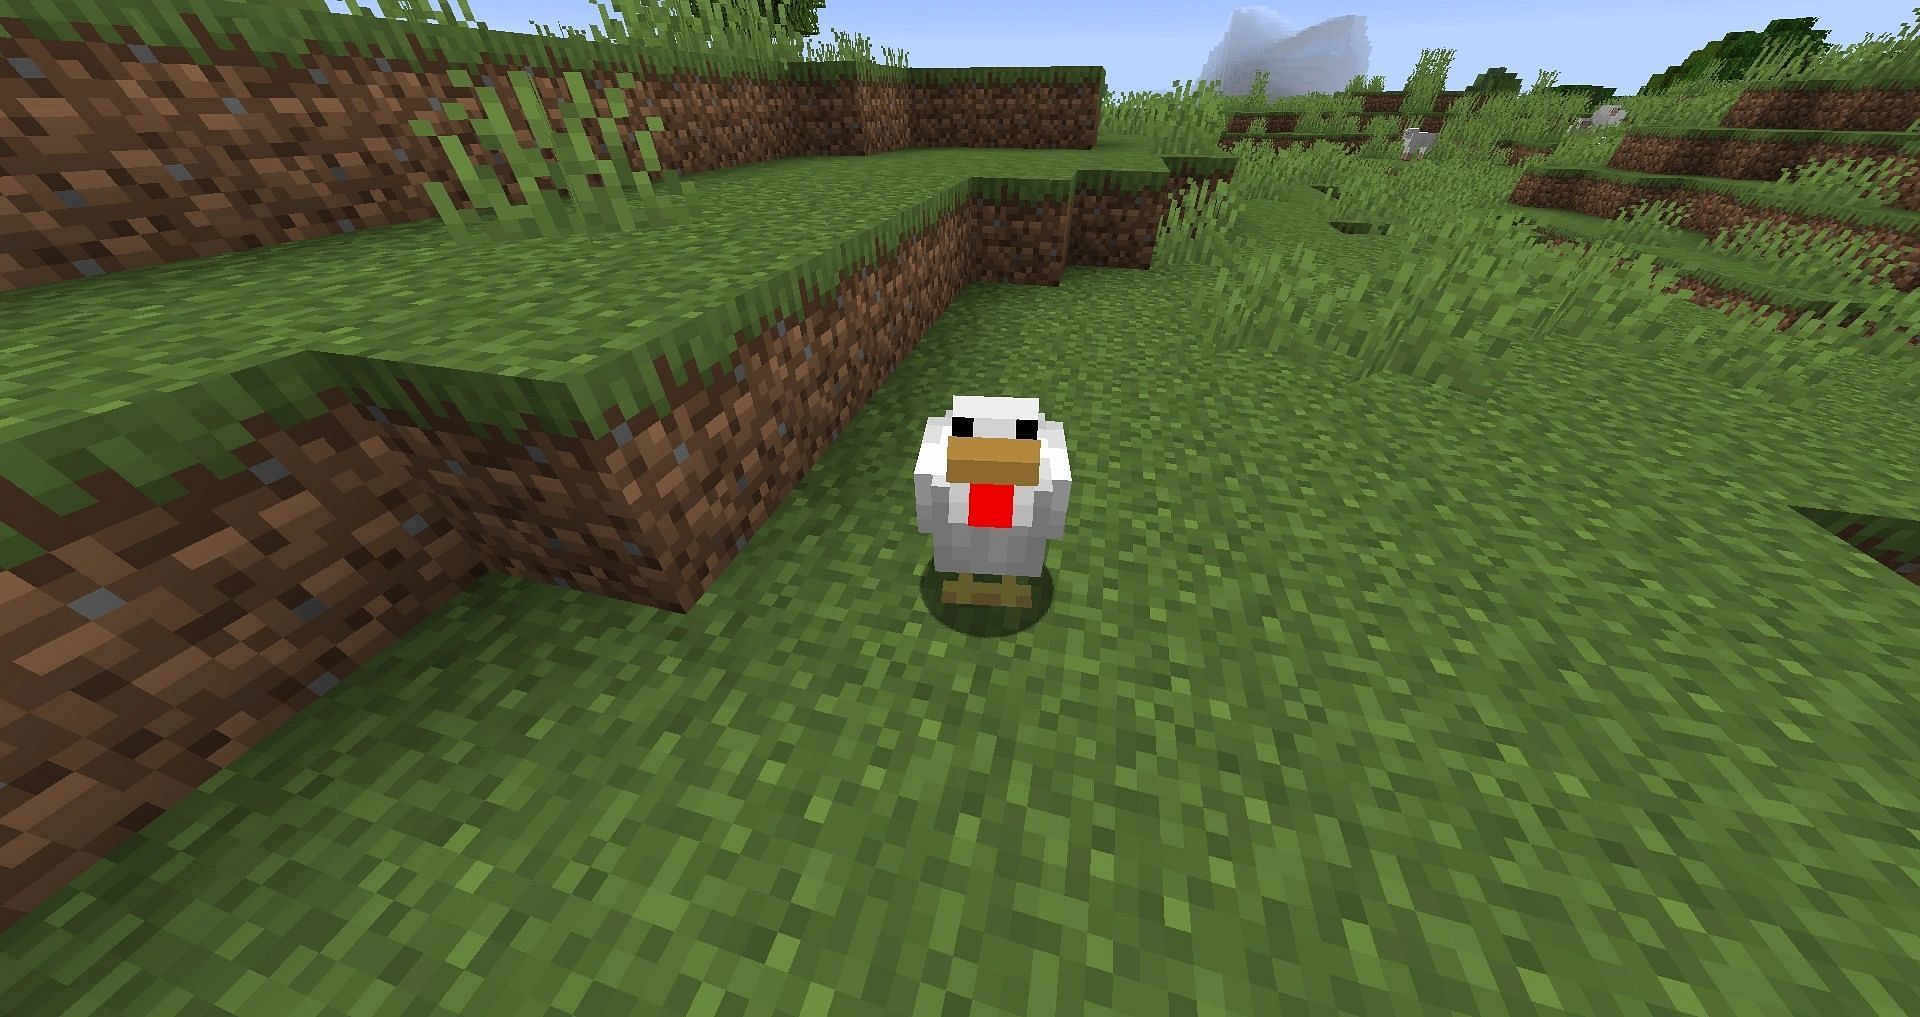 Chicken can also be farmed to obtain egg and raw chicken meat (Image via Minecraft Wiki)